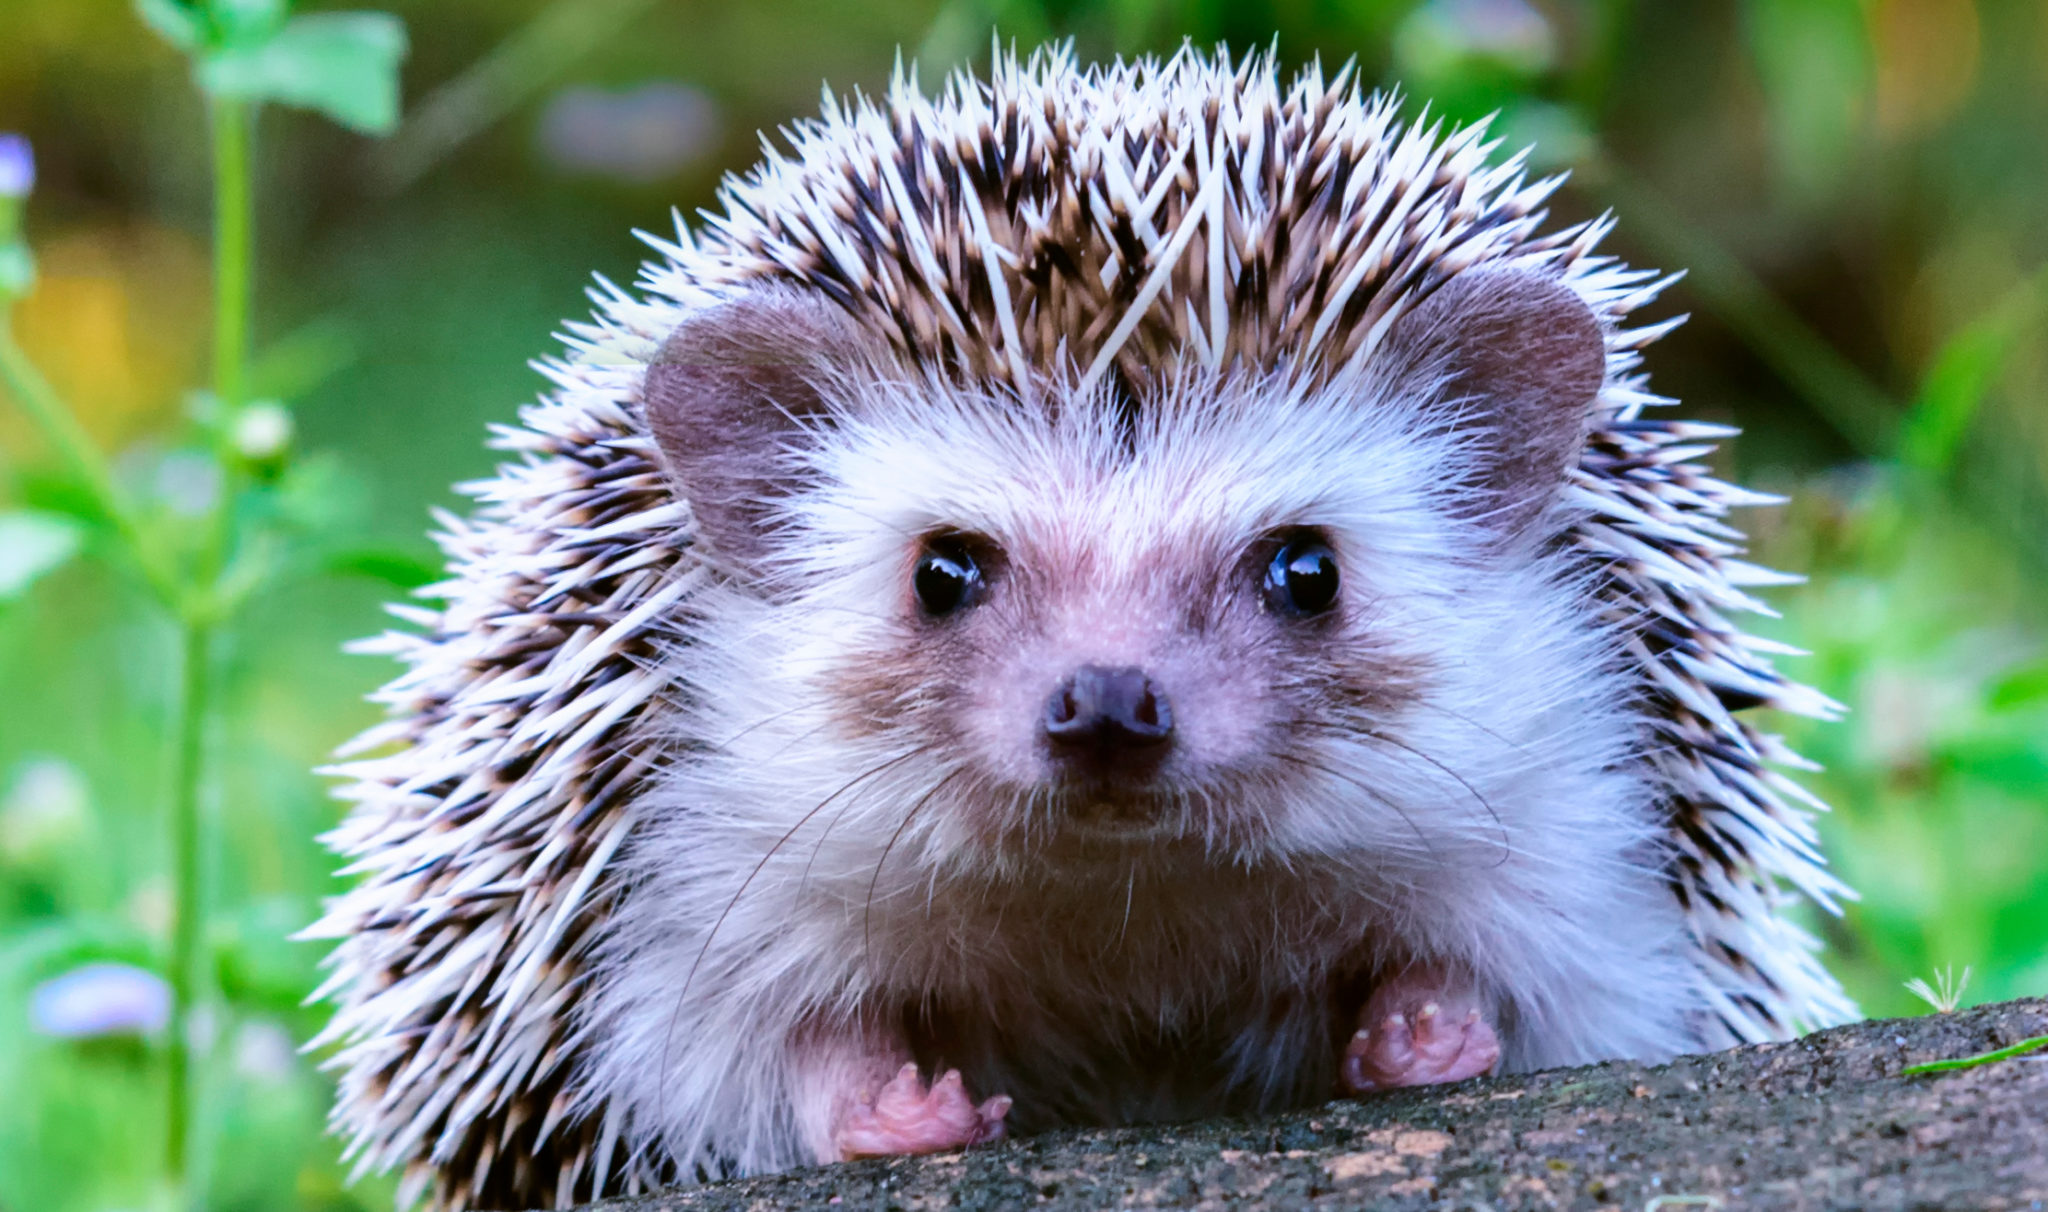 What are some interesting facts about hedgehogs?